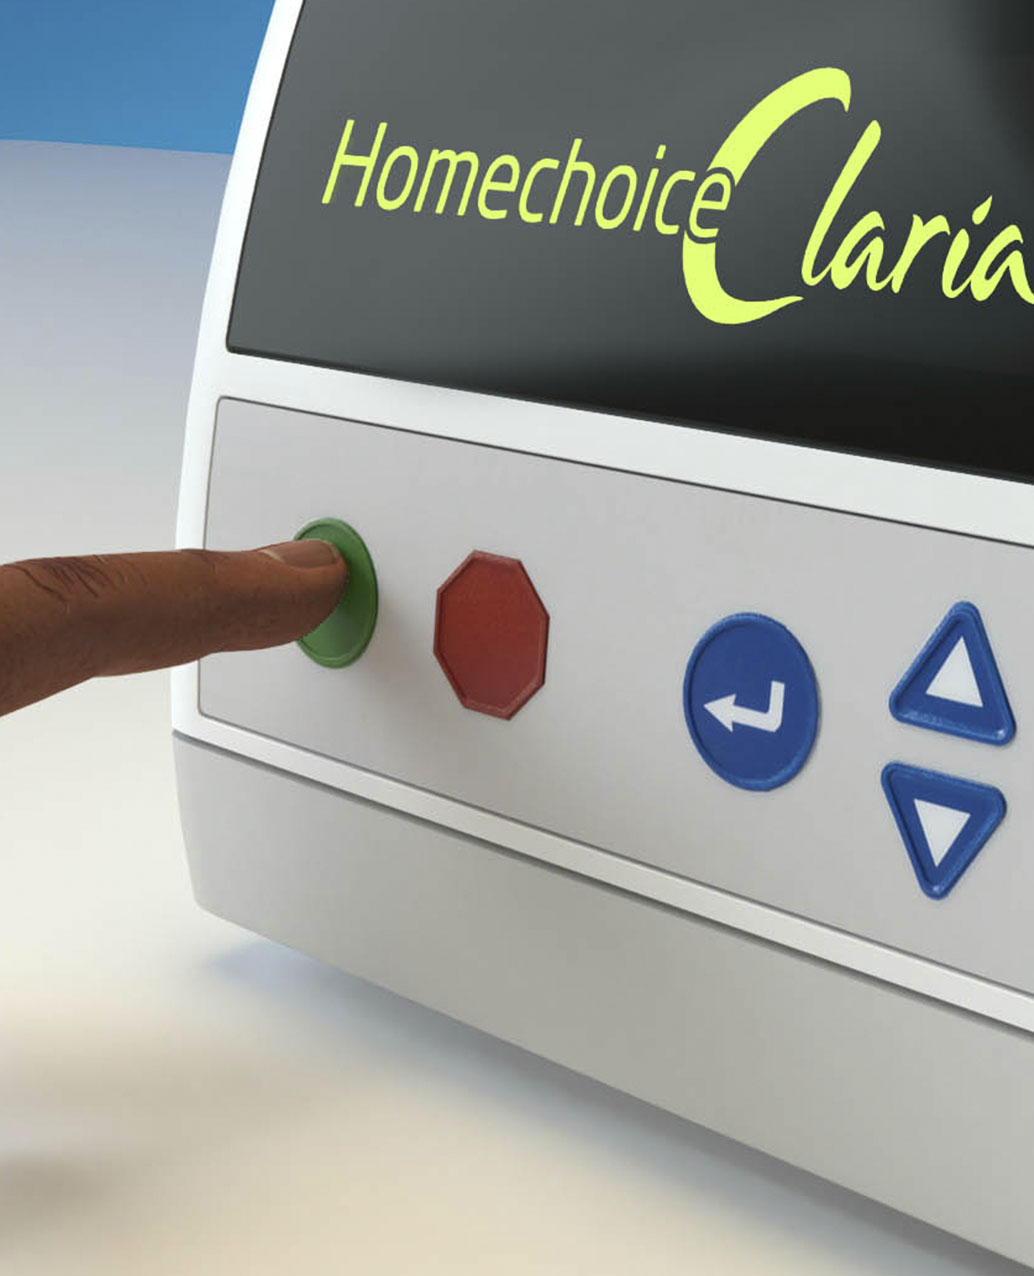 Finger selecting a green button on the Homechoice Claria ADP machine